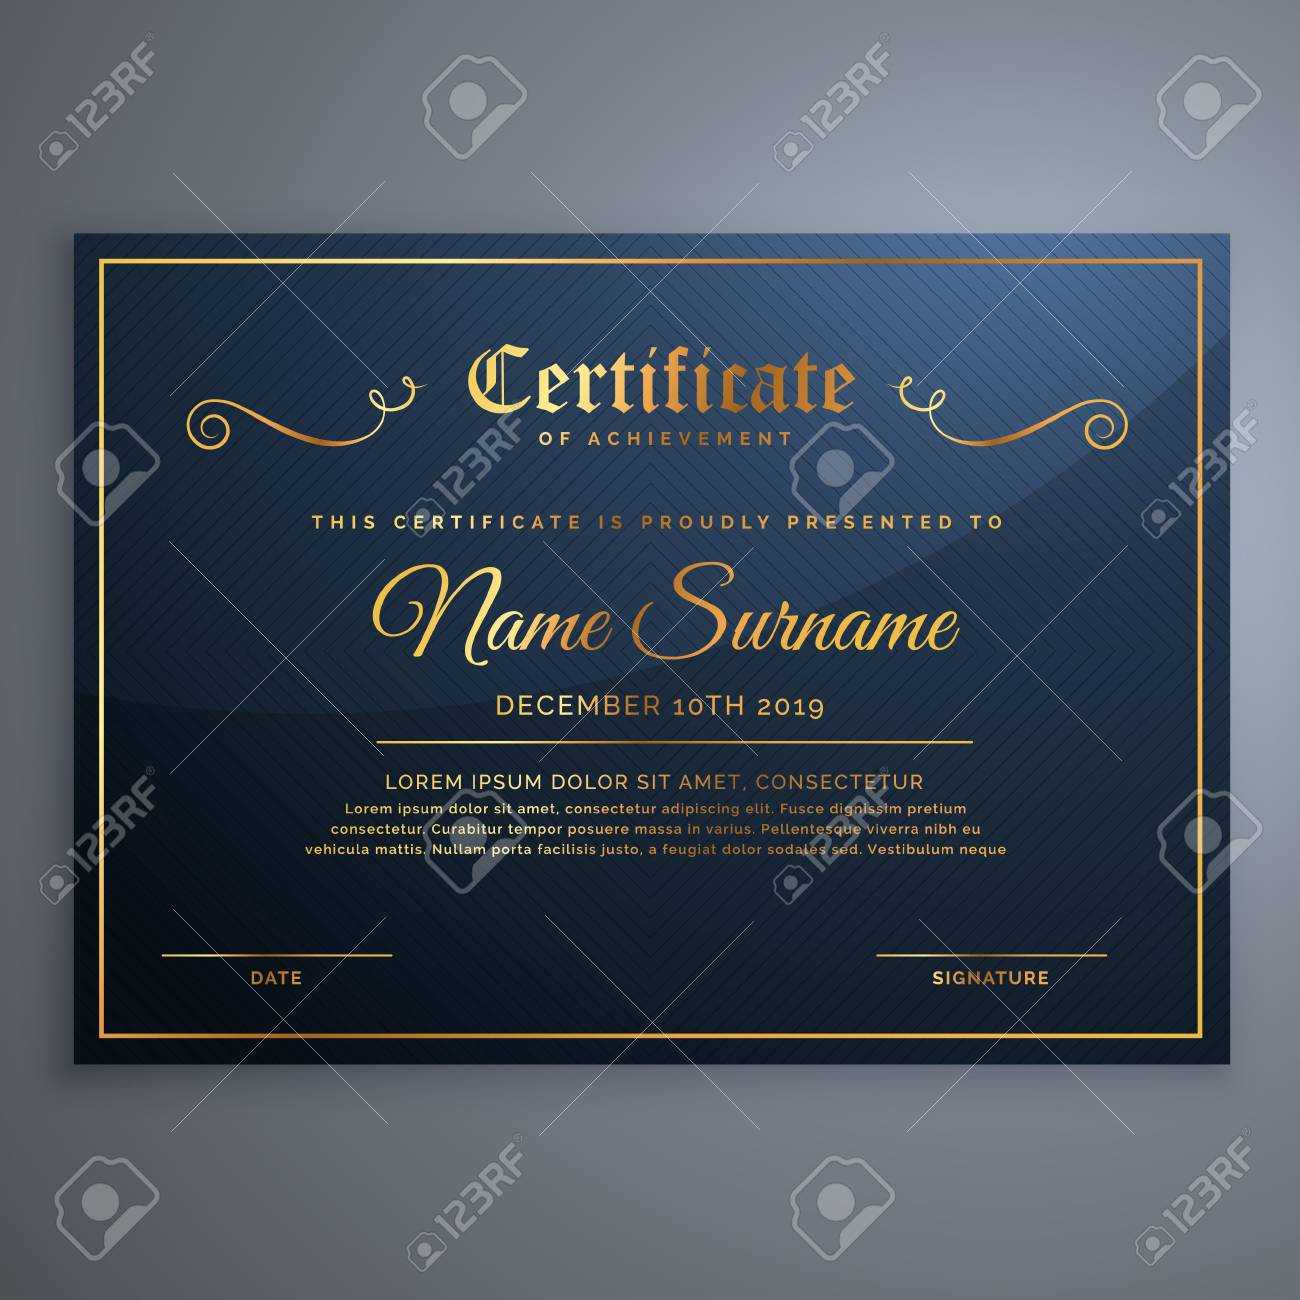 Premium Blue Certificate Template Design In Golden Style Throughout Christian Certificate Template